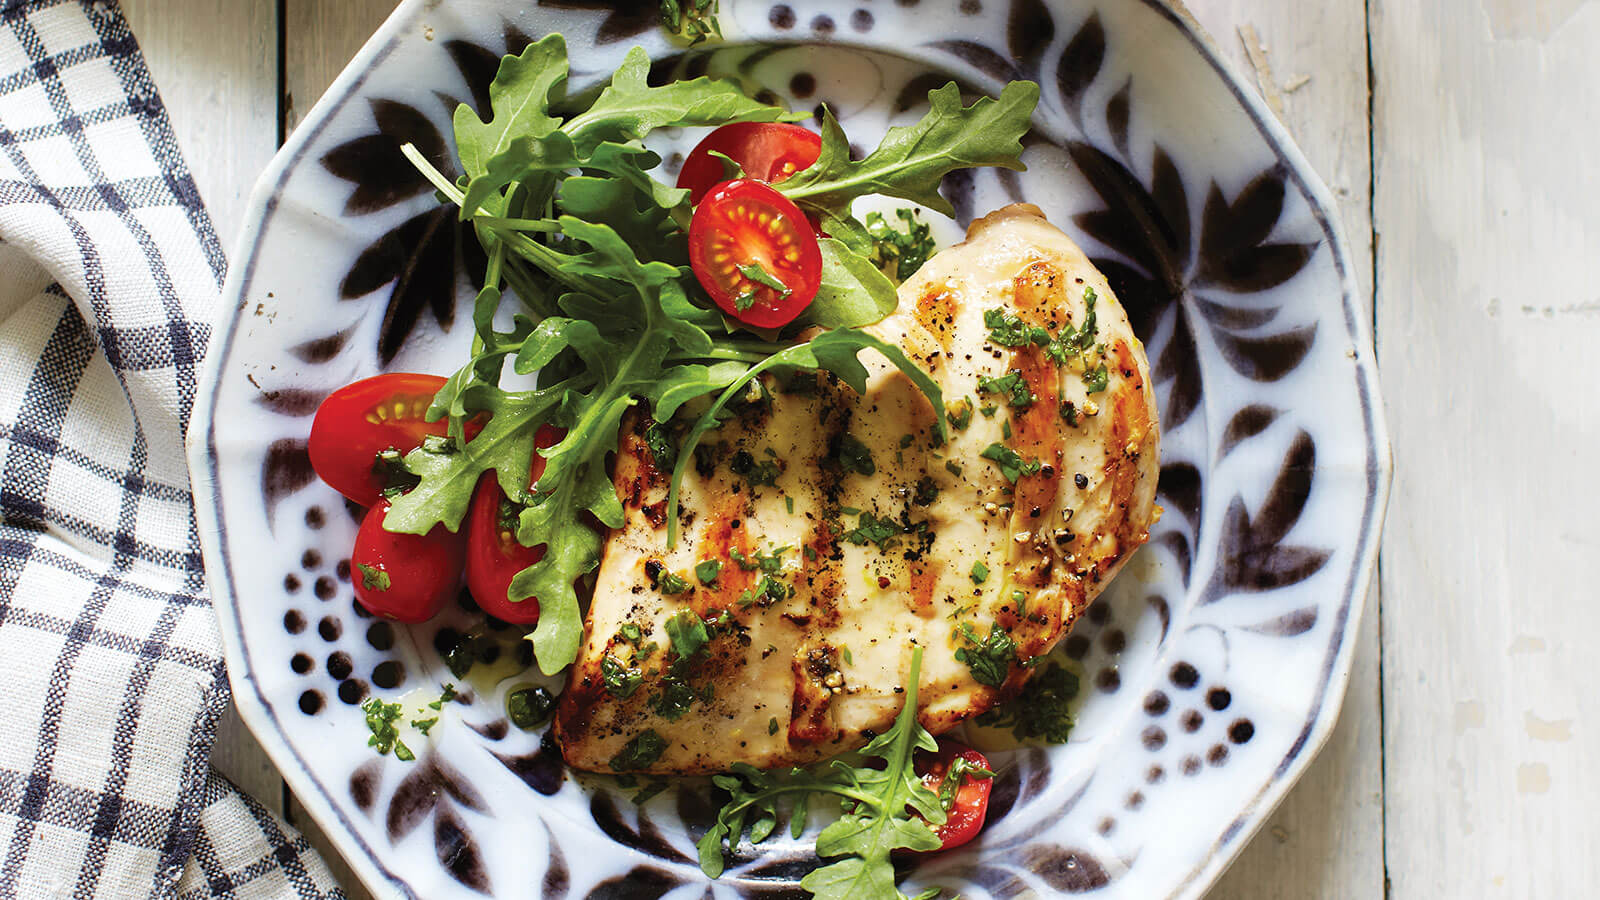 Marinated-Chicken-with-Basil-Drizzle